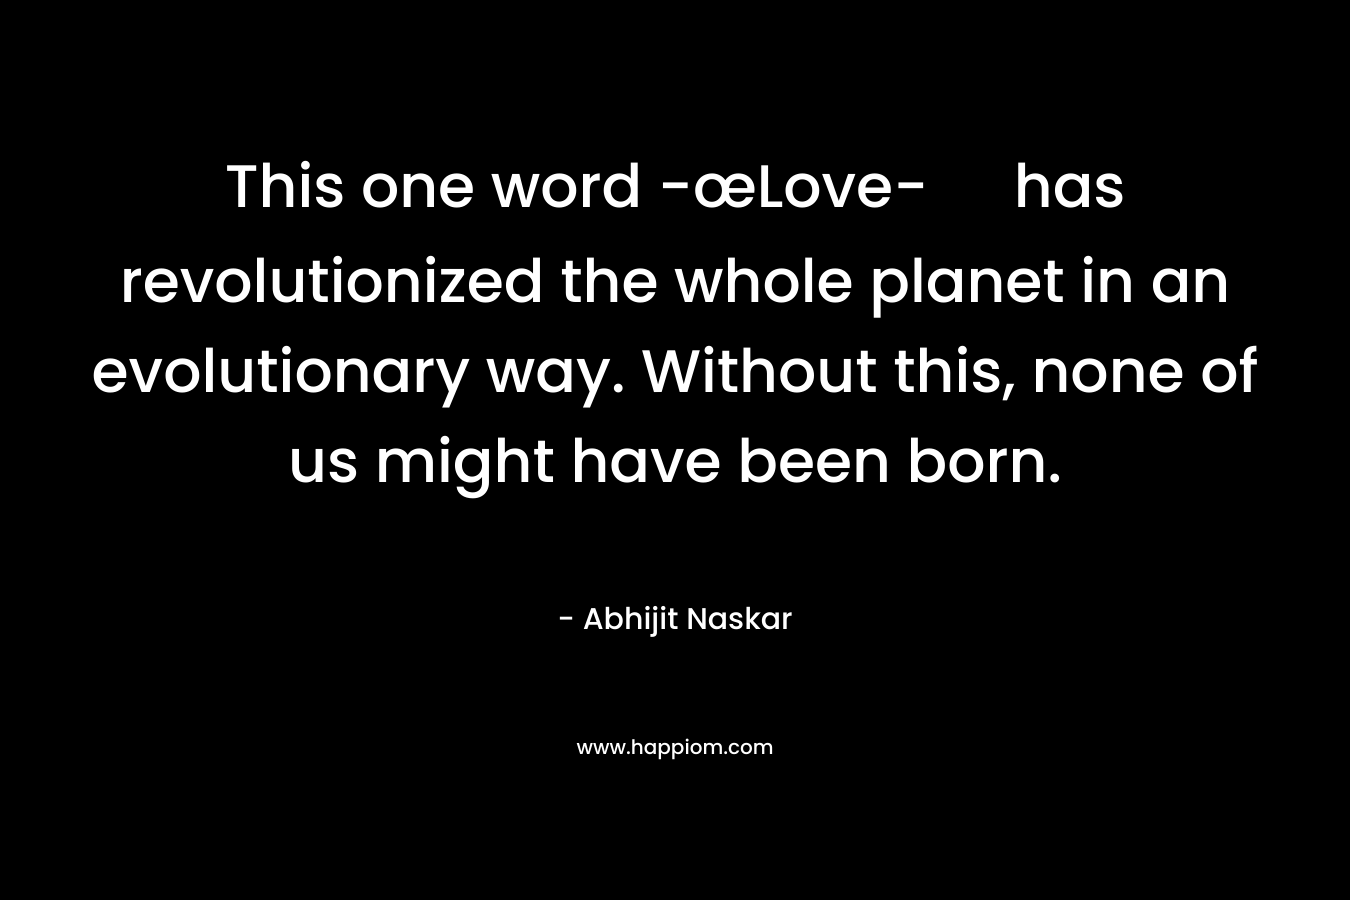 This one word -œLove- has revolutionized the whole planet in an evolutionary way. Without this, none of us might have been born. – Abhijit Naskar